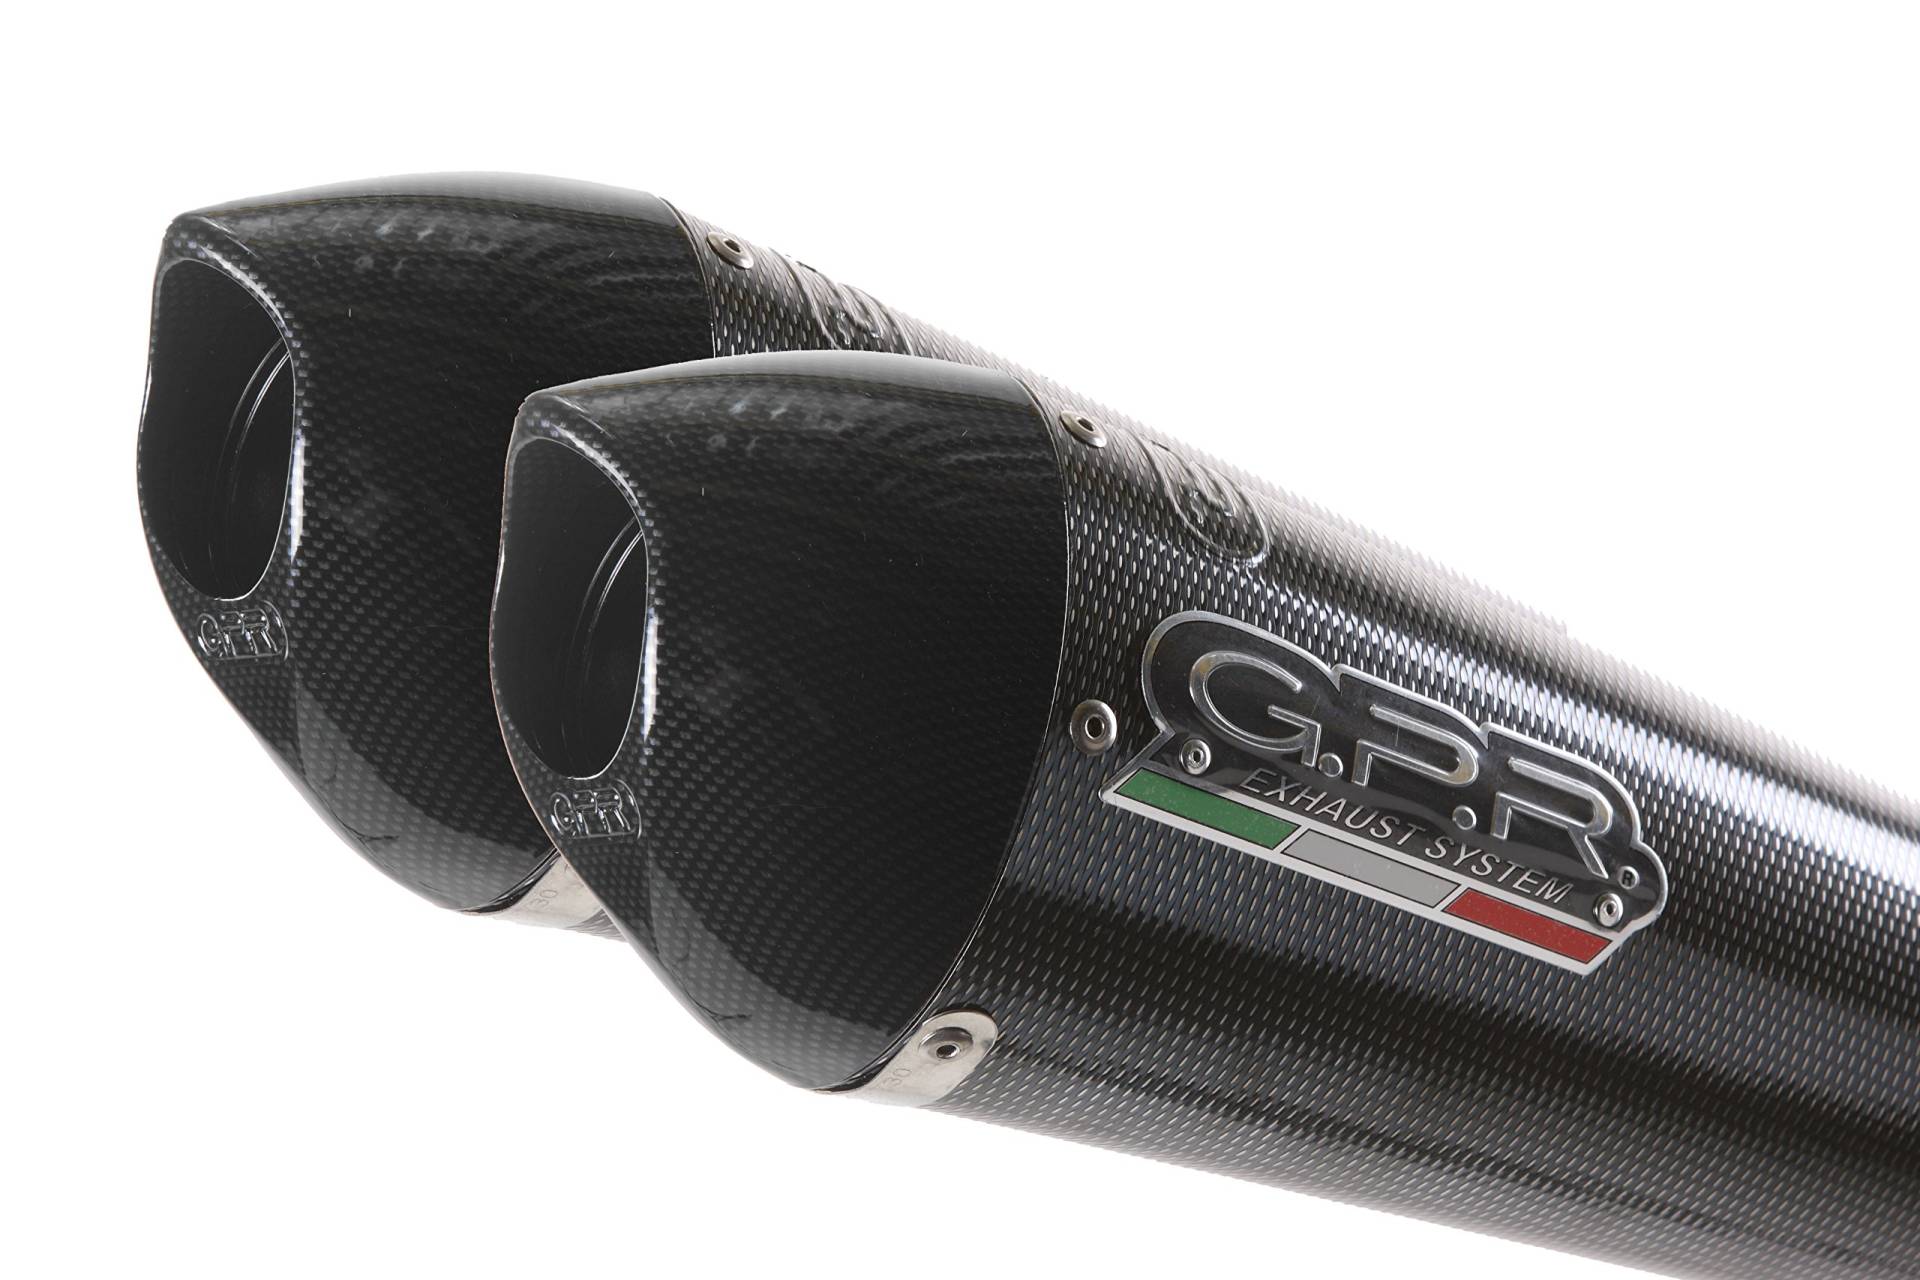 GPR Auspuff Endkappe – Ducati Monster 400 – 600 – 750 – 900 1993/00 Dual HOMOLOGATED Slip Exhaust System High Level by GPR Exhaust Systems der EVO Poppy Line von GPR EXHAUST SYSTEM